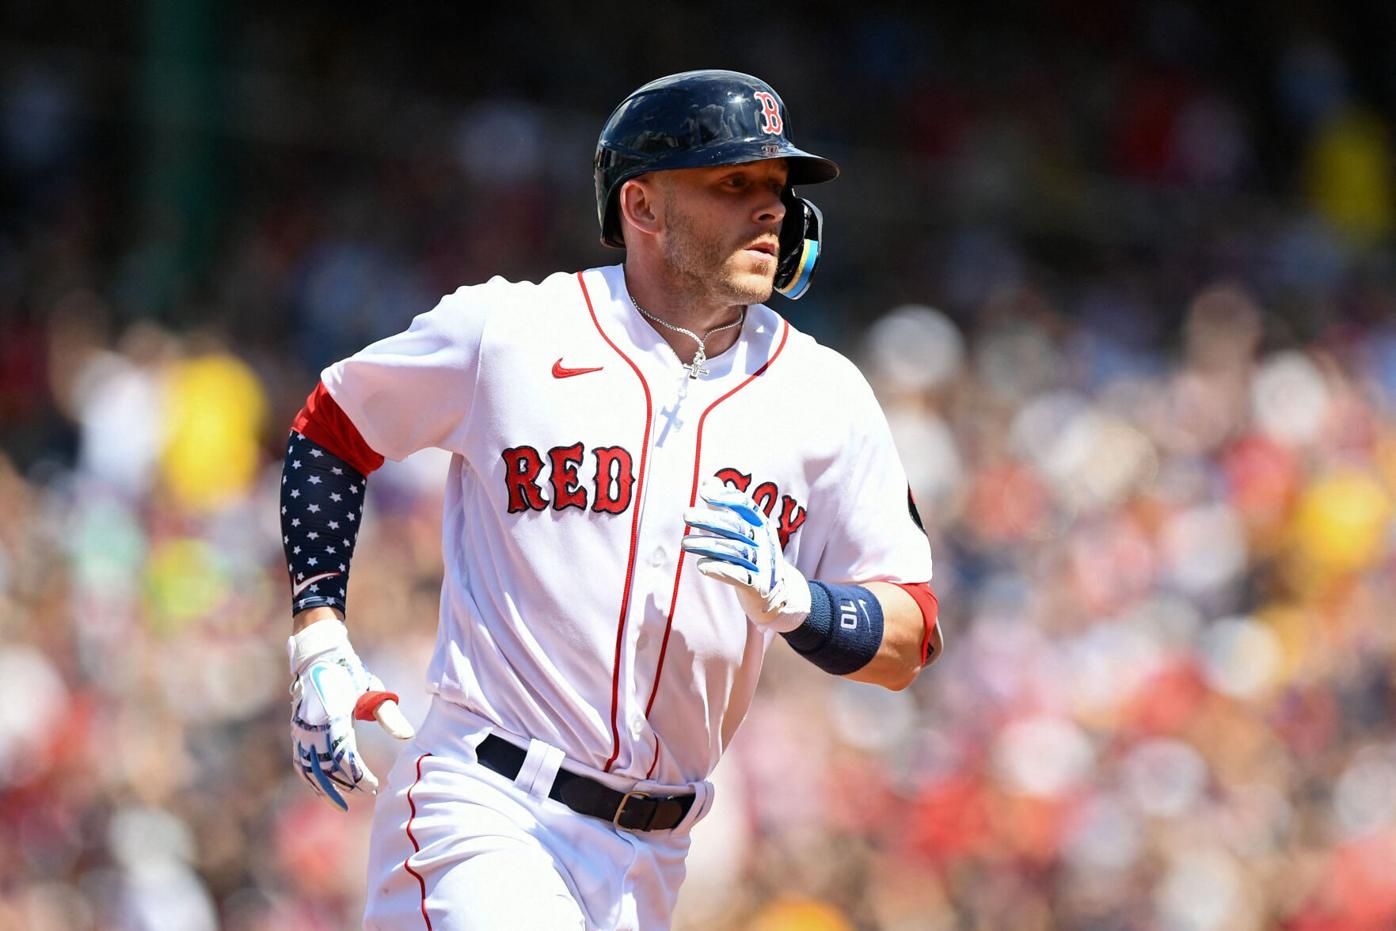 Red Sox players ready to get spring training games underway